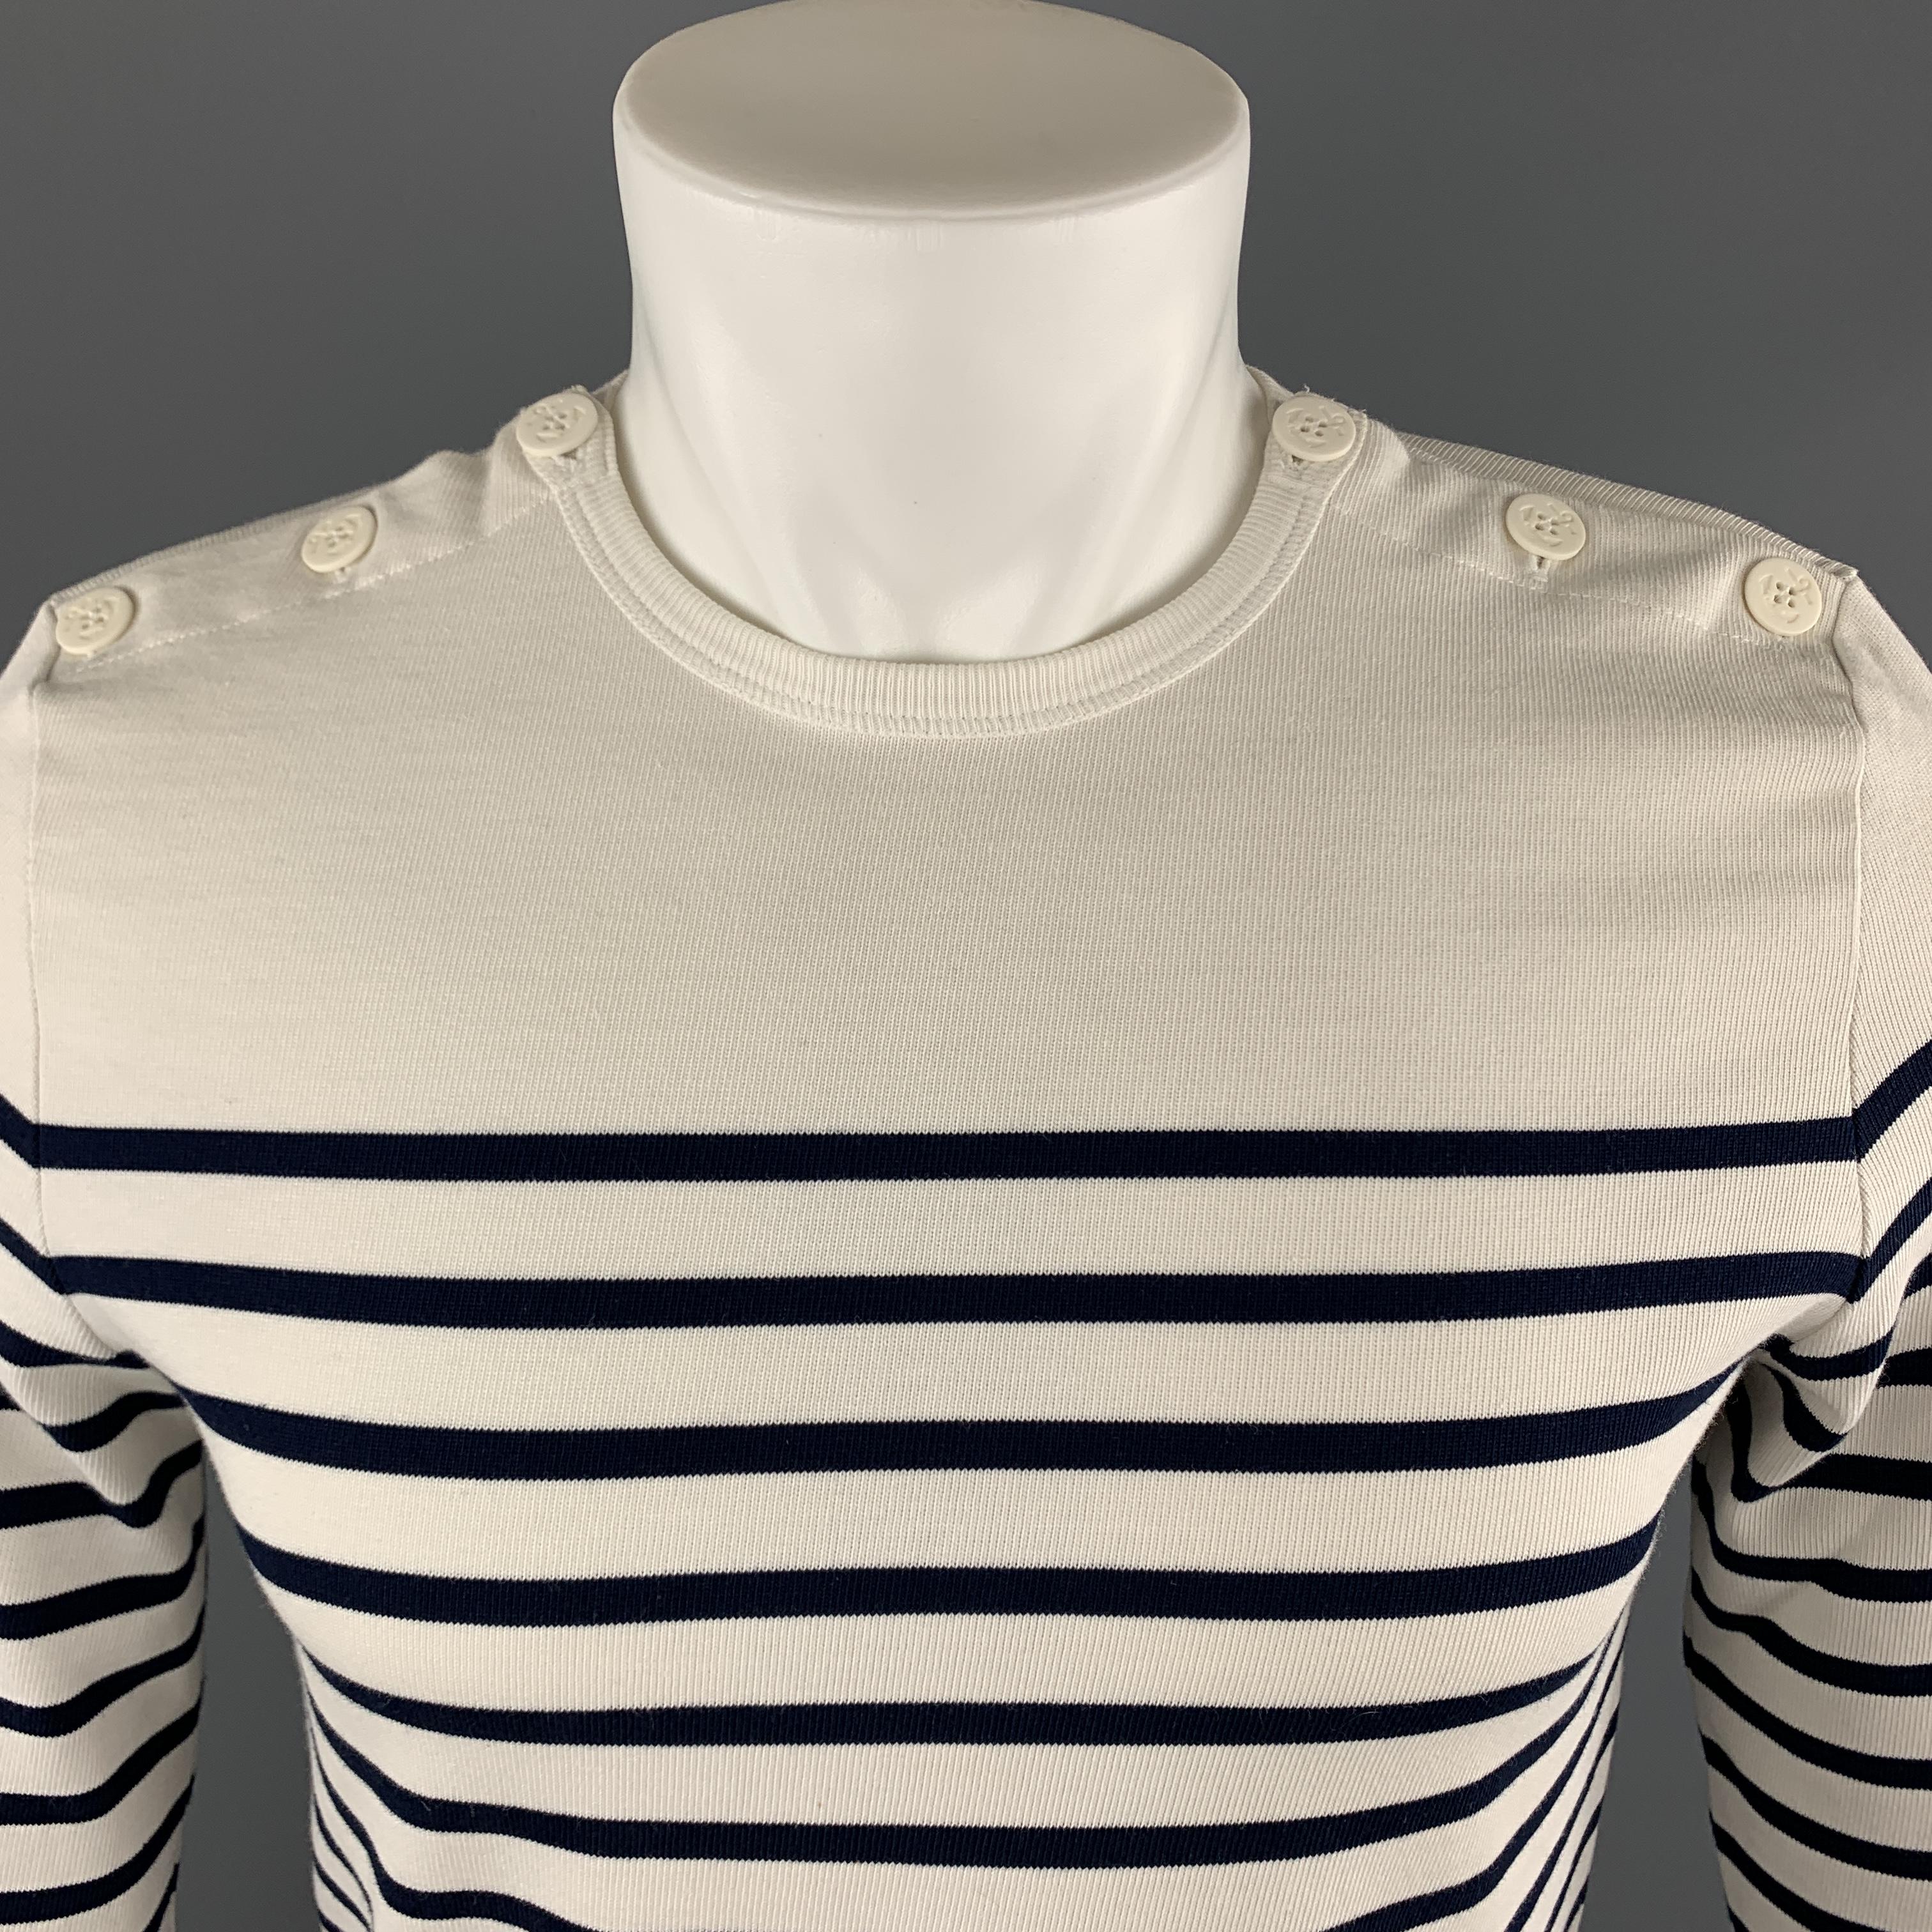 Vintage JEAN PAUL GAULTIER MATELOT nautical pullover comes in white cotton with navy stripes and anchor button shoulders. Made in Portugal.

Excellent Pre-Owned Condition.
Marked: (no size)

Measurements:

Shoulder: 15 in.
Chest: 38 in.
Sleeve: 24